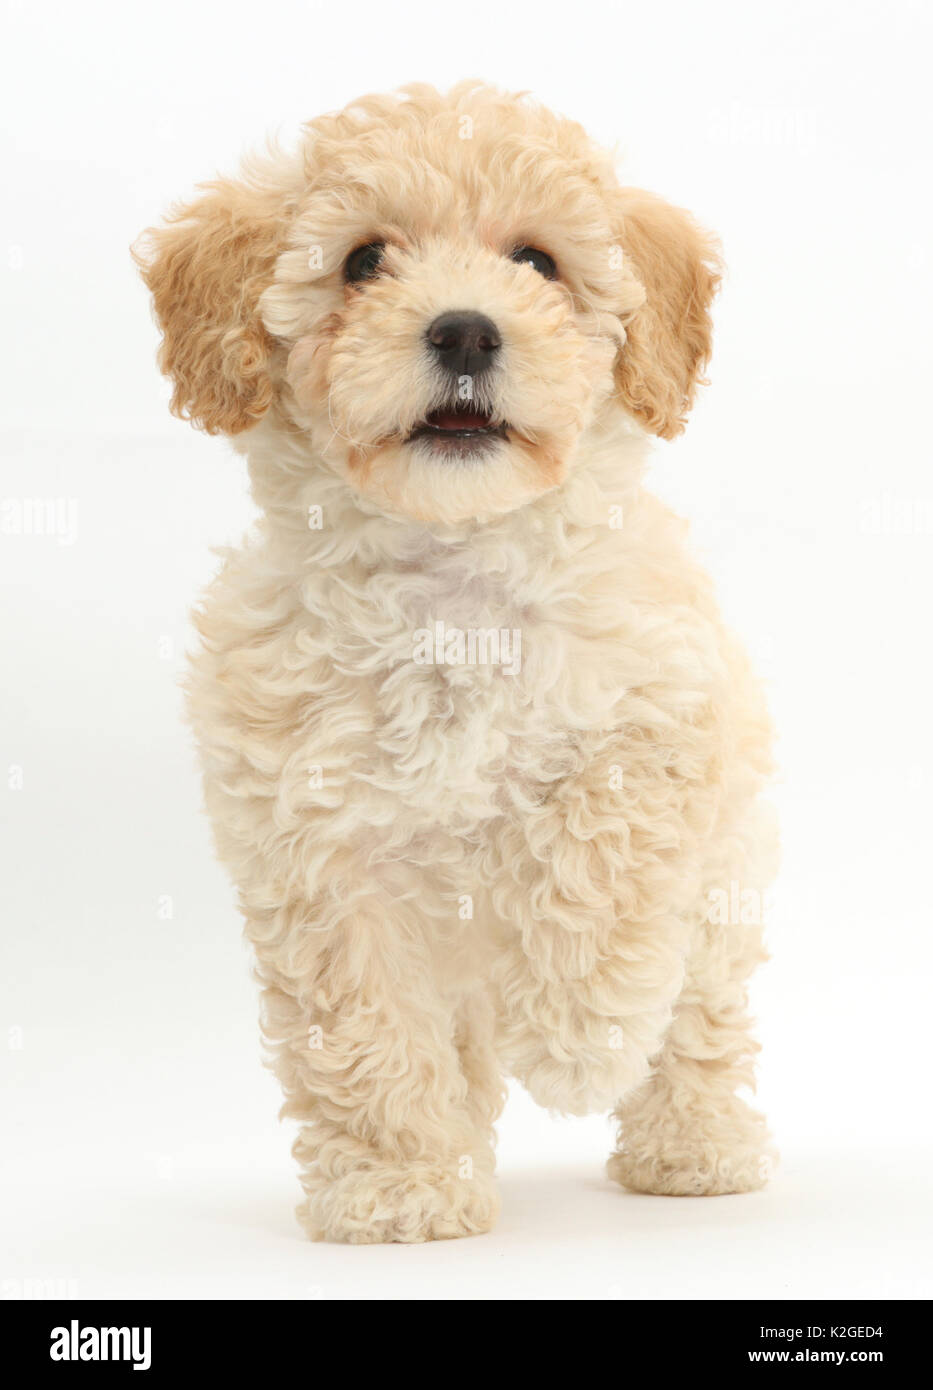 Bichon Frise Cutout High Resolution Stock Photography and Images - Alamy